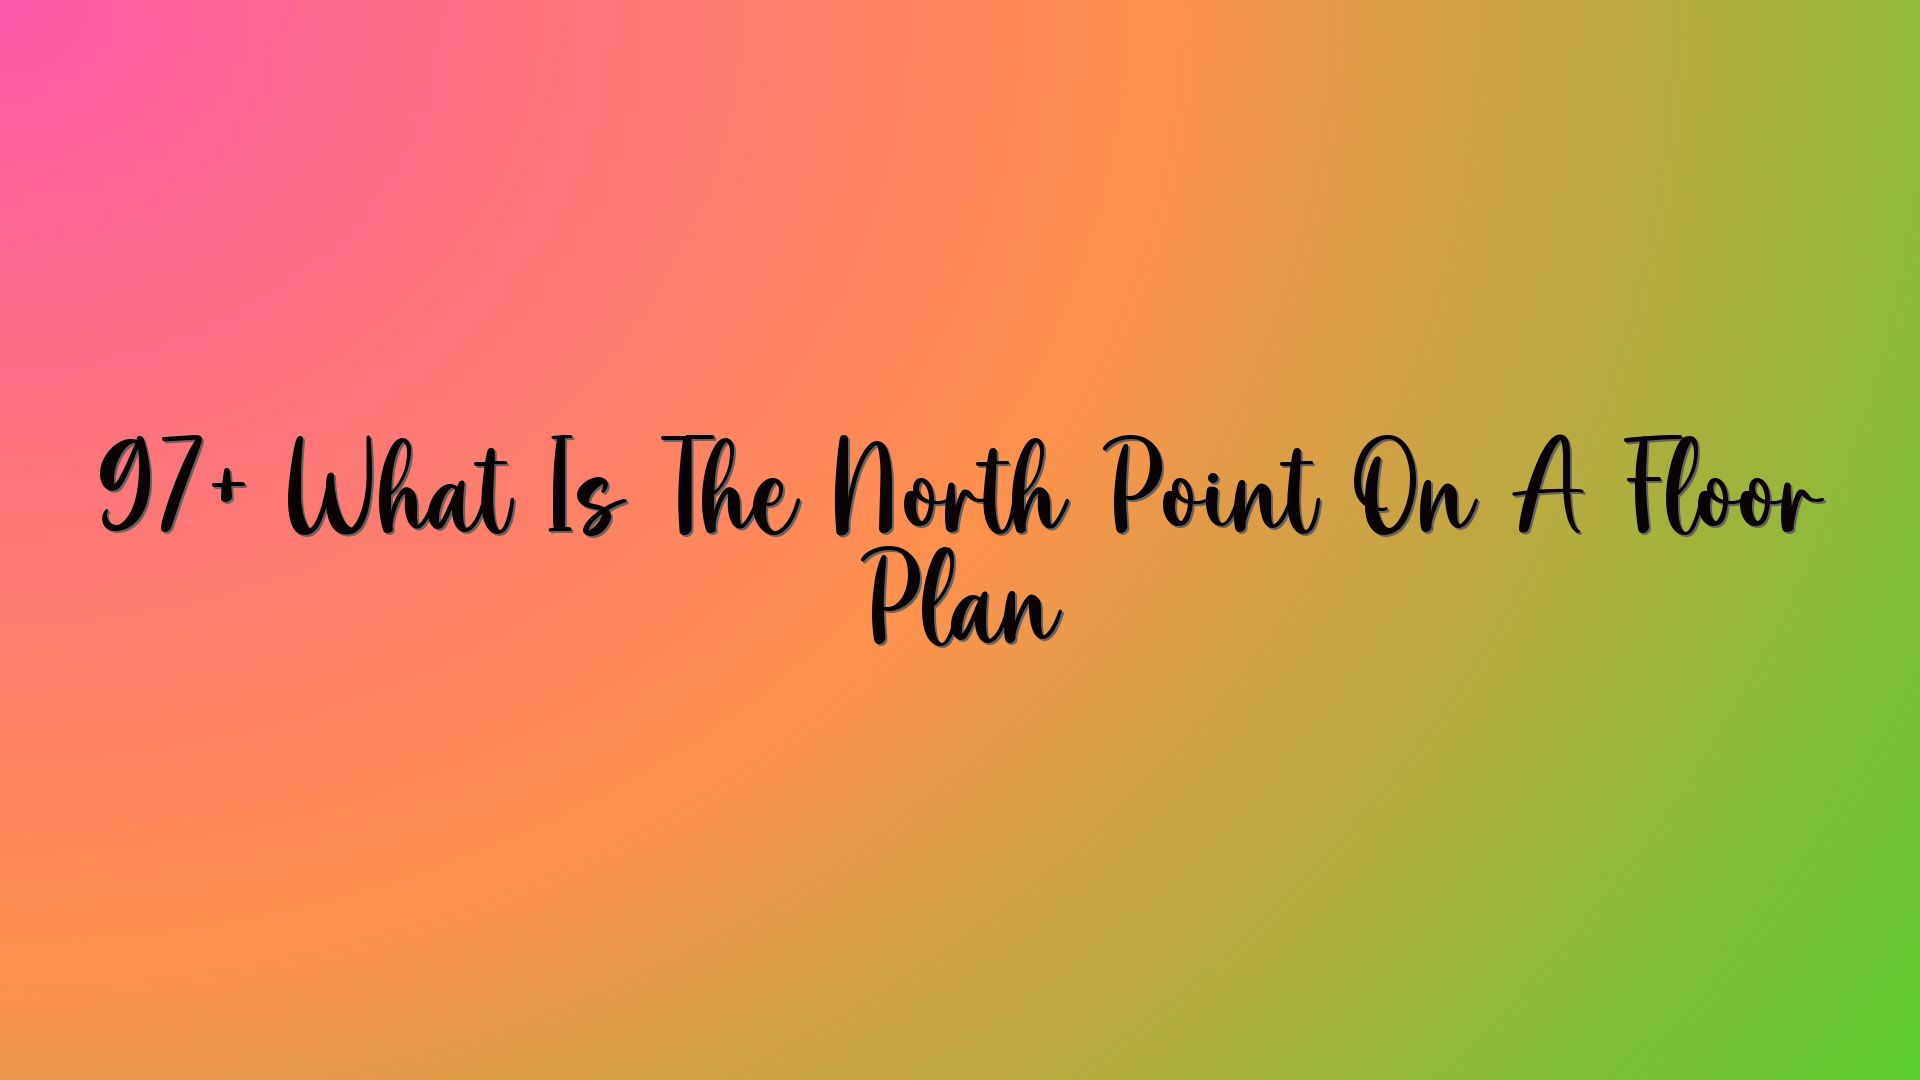 97+ What Is The North Point On A Floor Plan